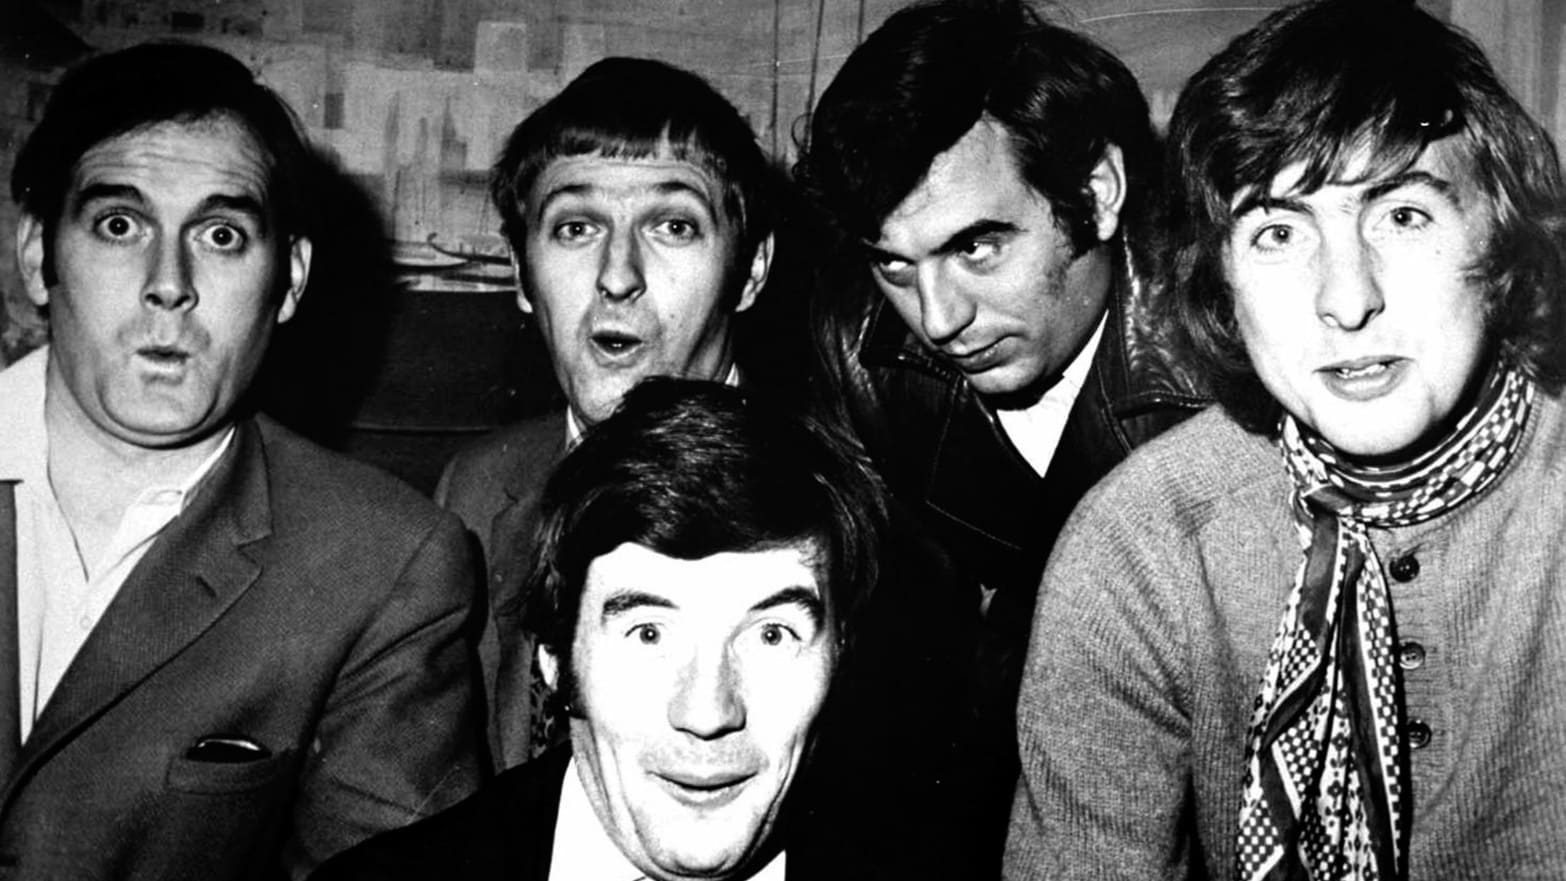 Monty Python'S Flying Circus Wallpapers